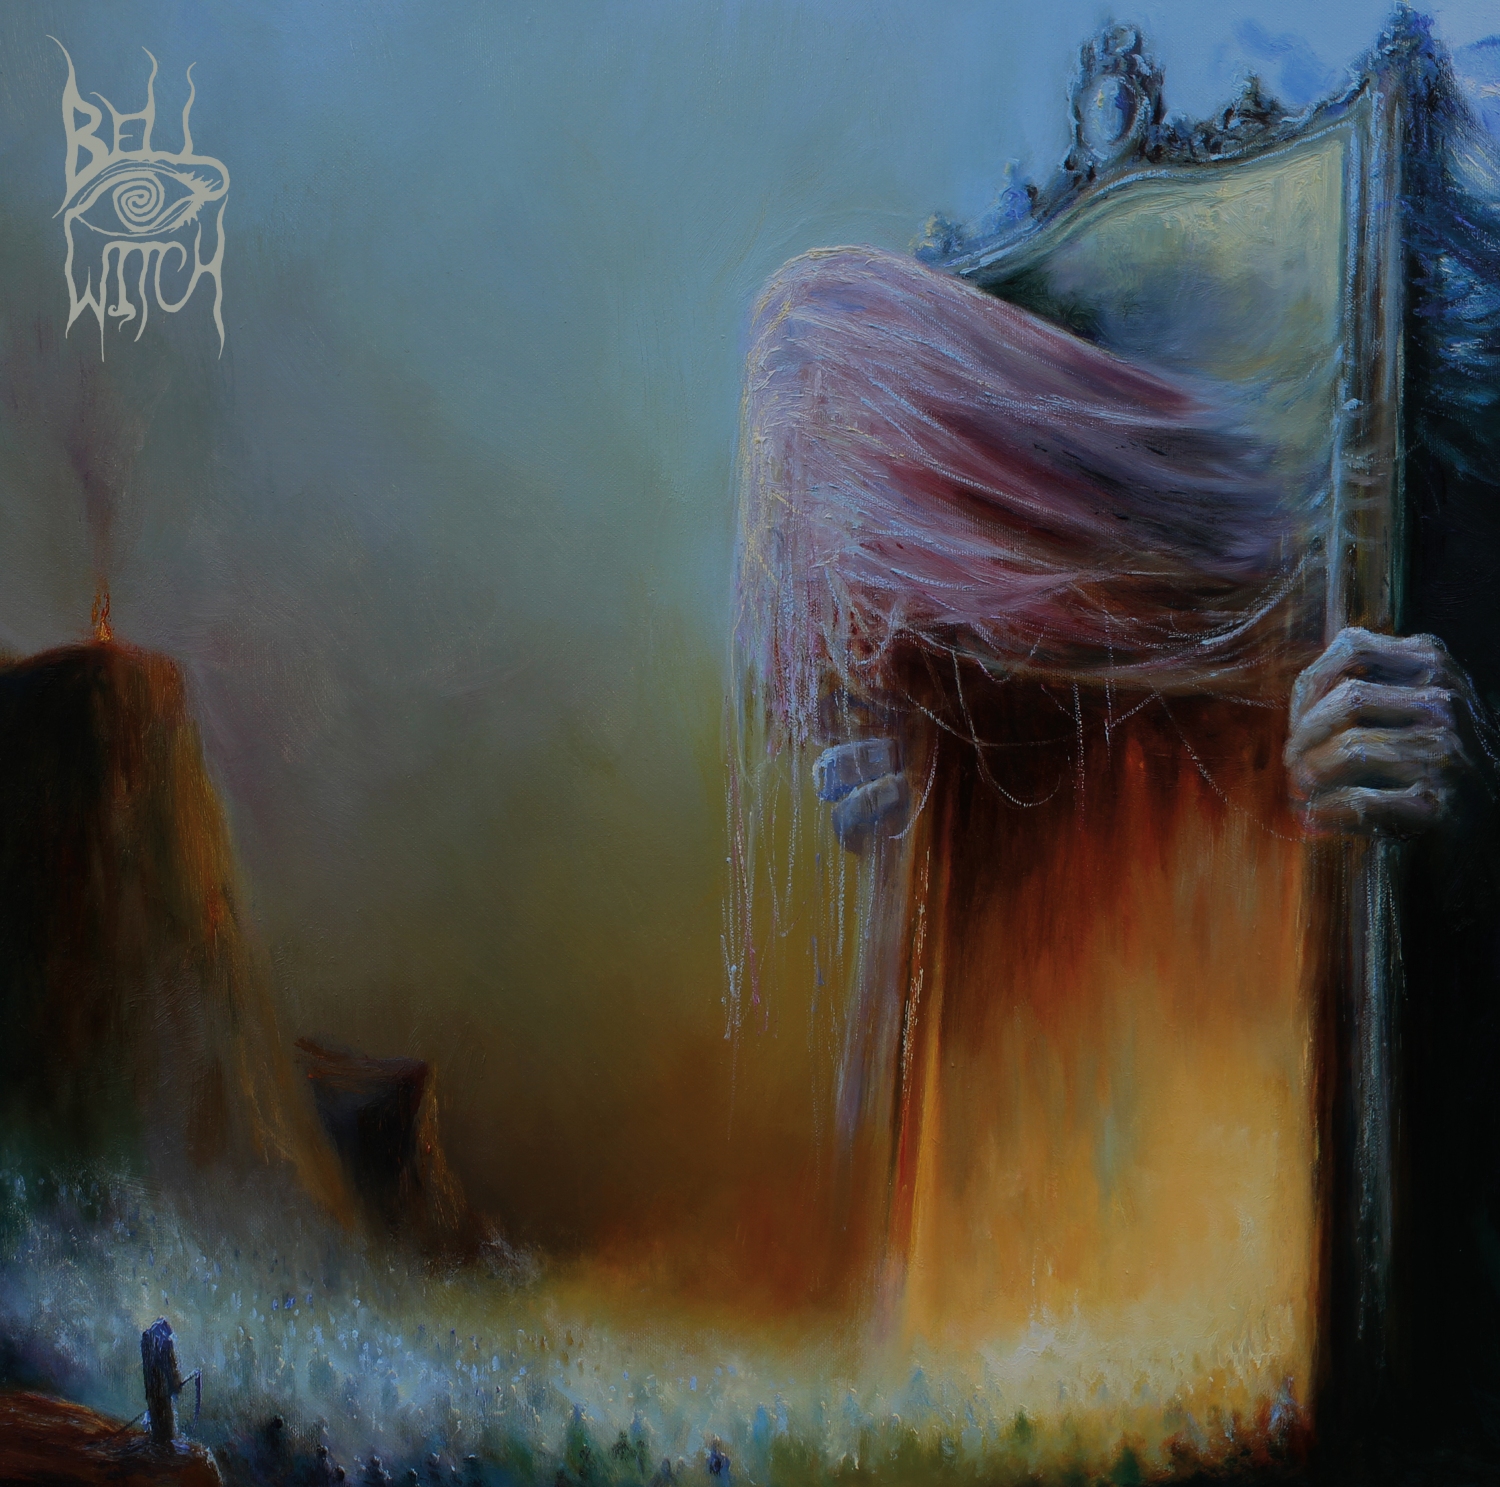 Bell Witch - Mirror Reaper Review | Angry Metal Guy